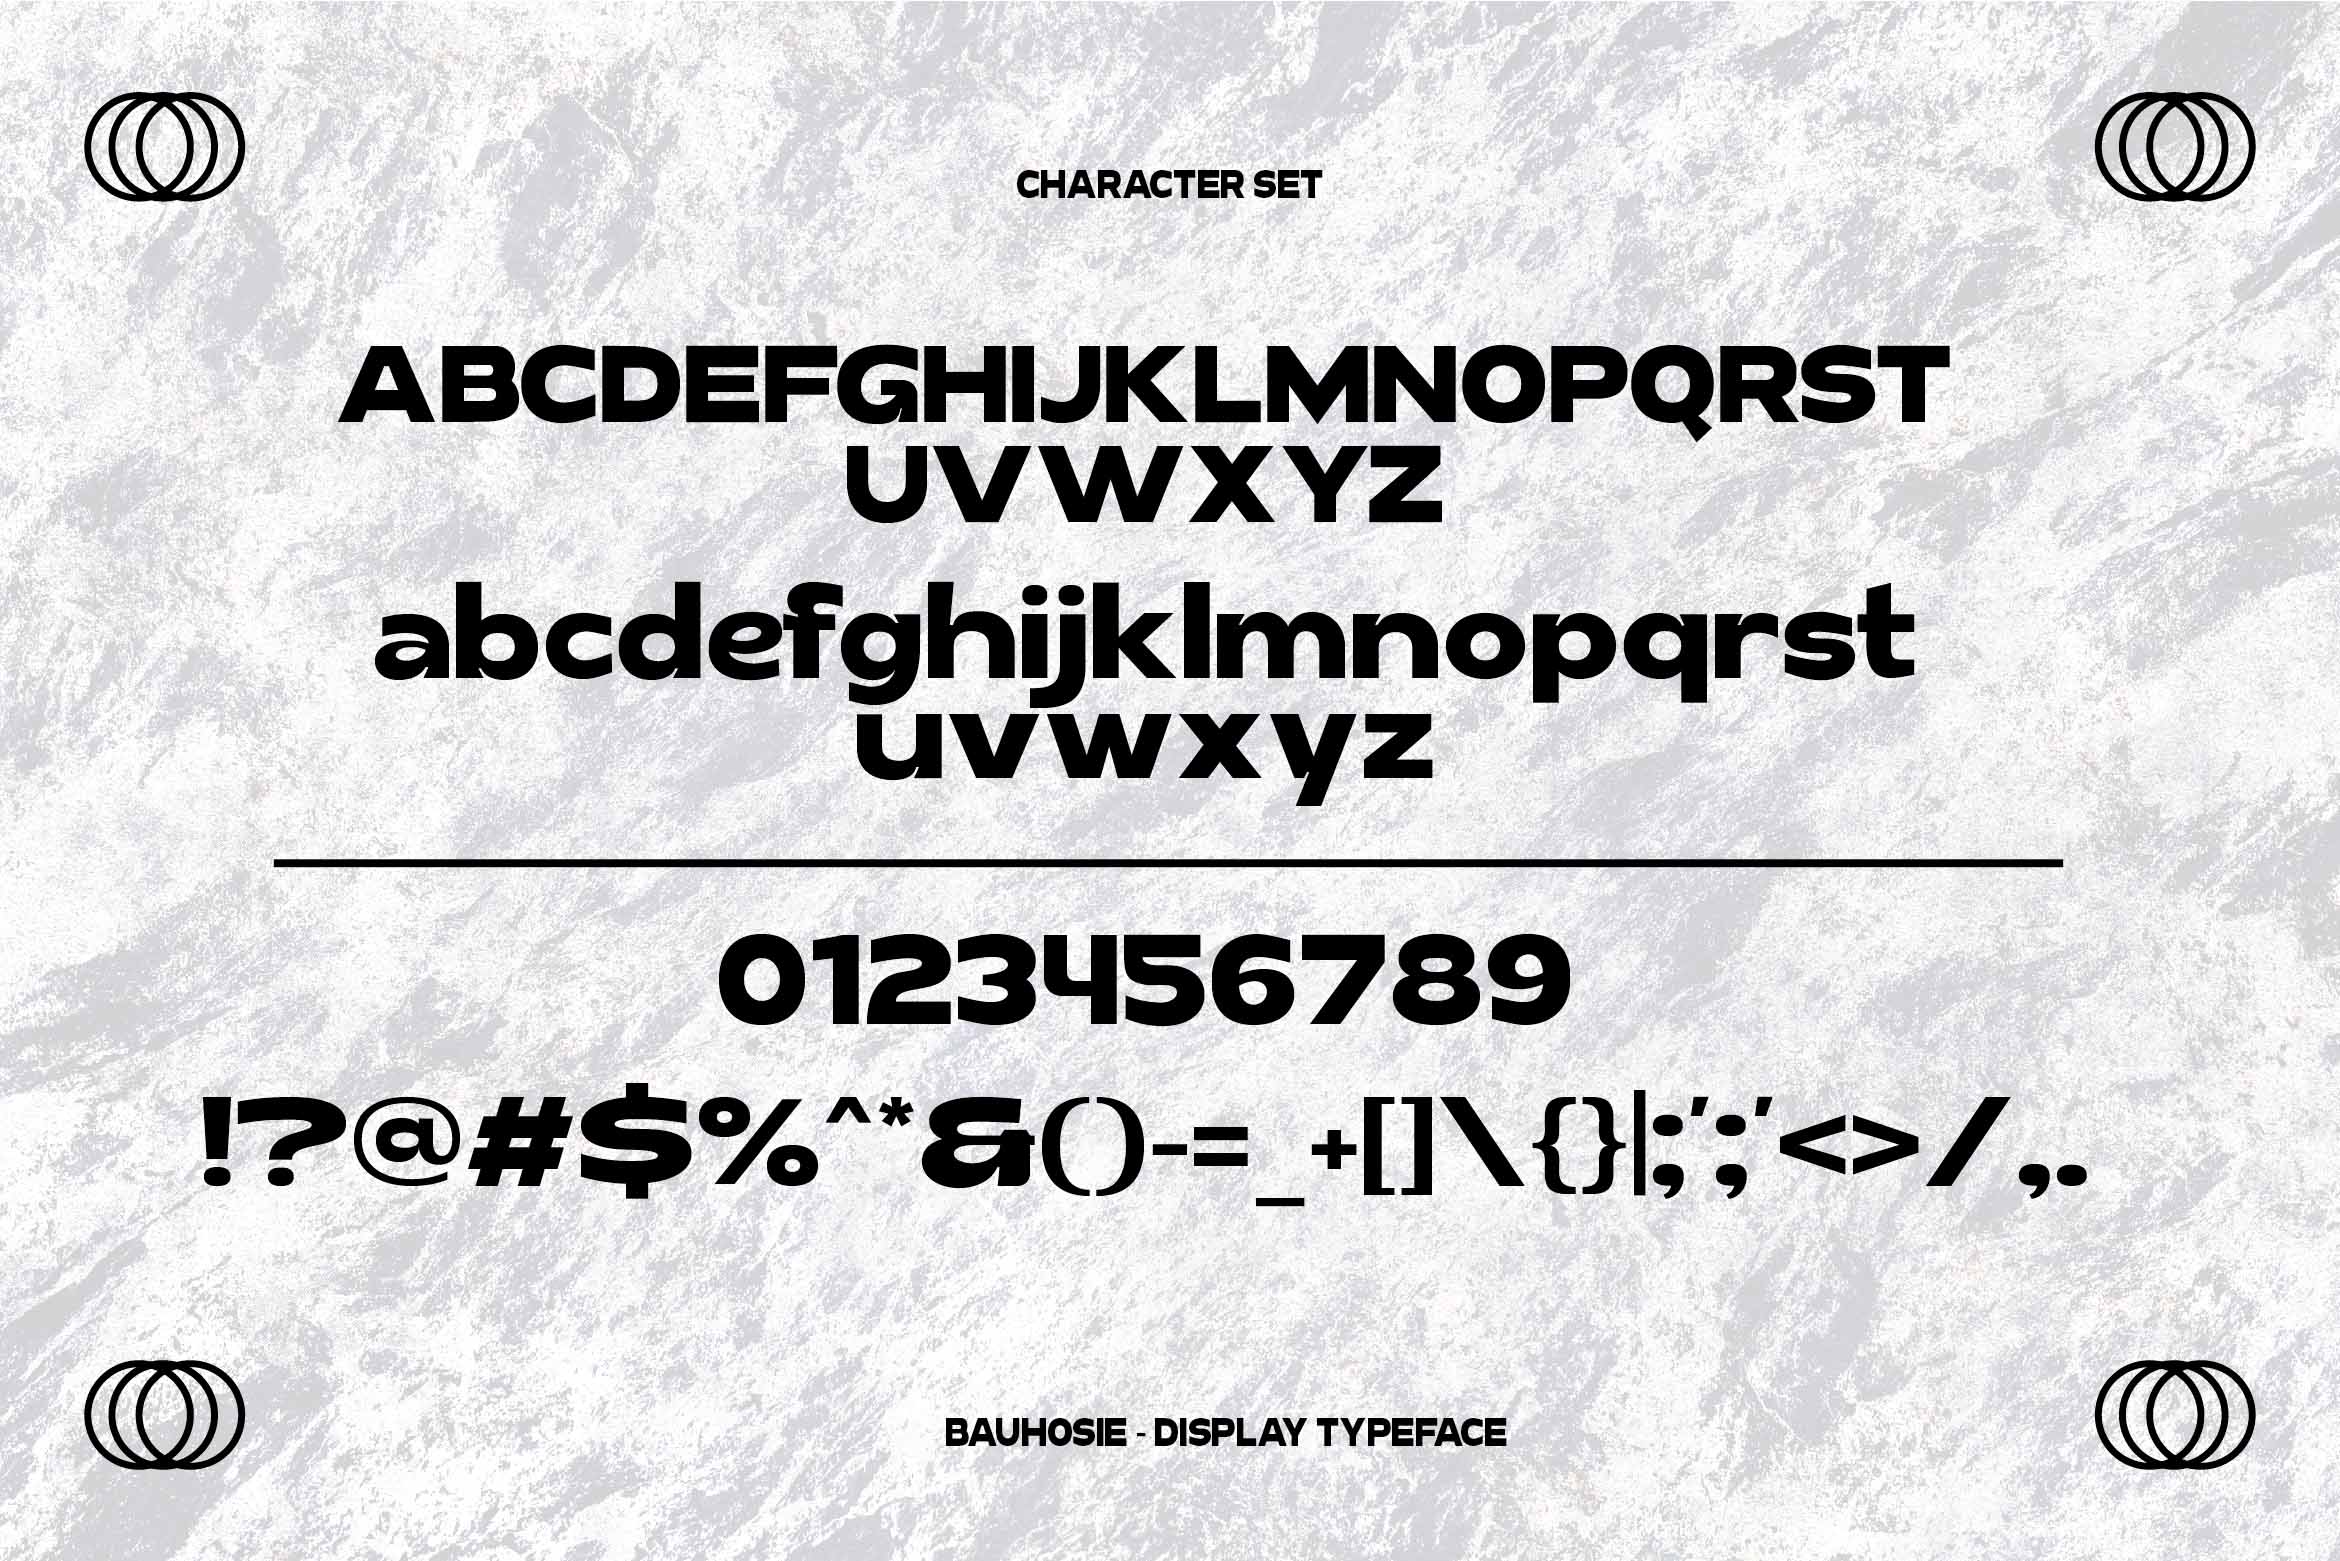 Image with alphabet demonstrating the beauty of the font.